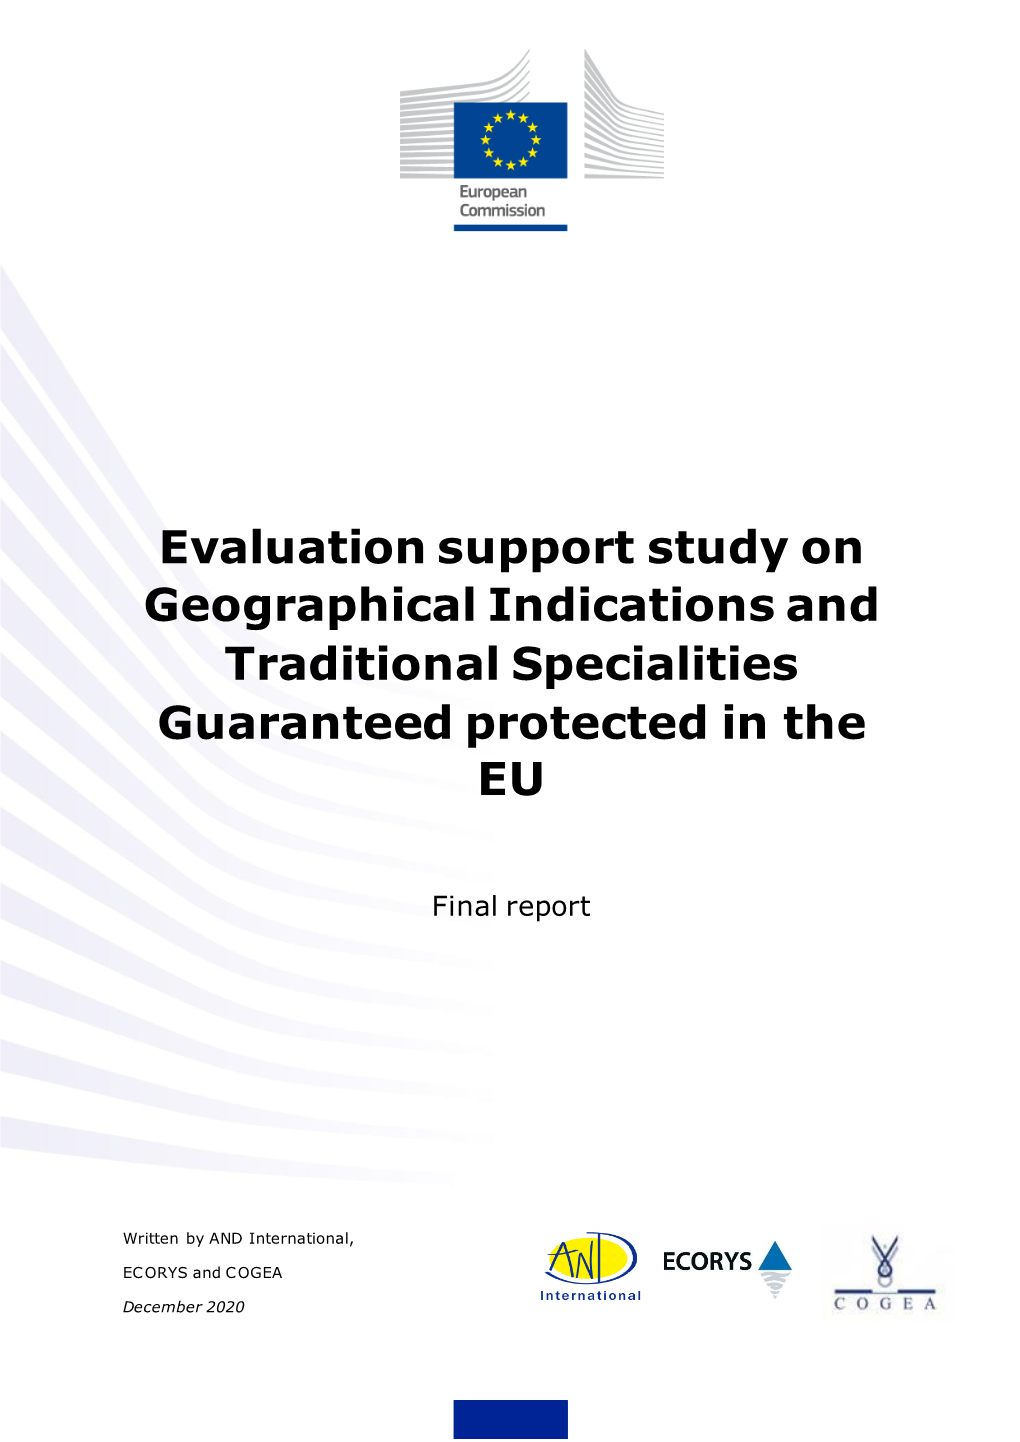 Evaluation Support Study on Geographical Indications and Traditional Specialities Guaranteed Protected in the EU